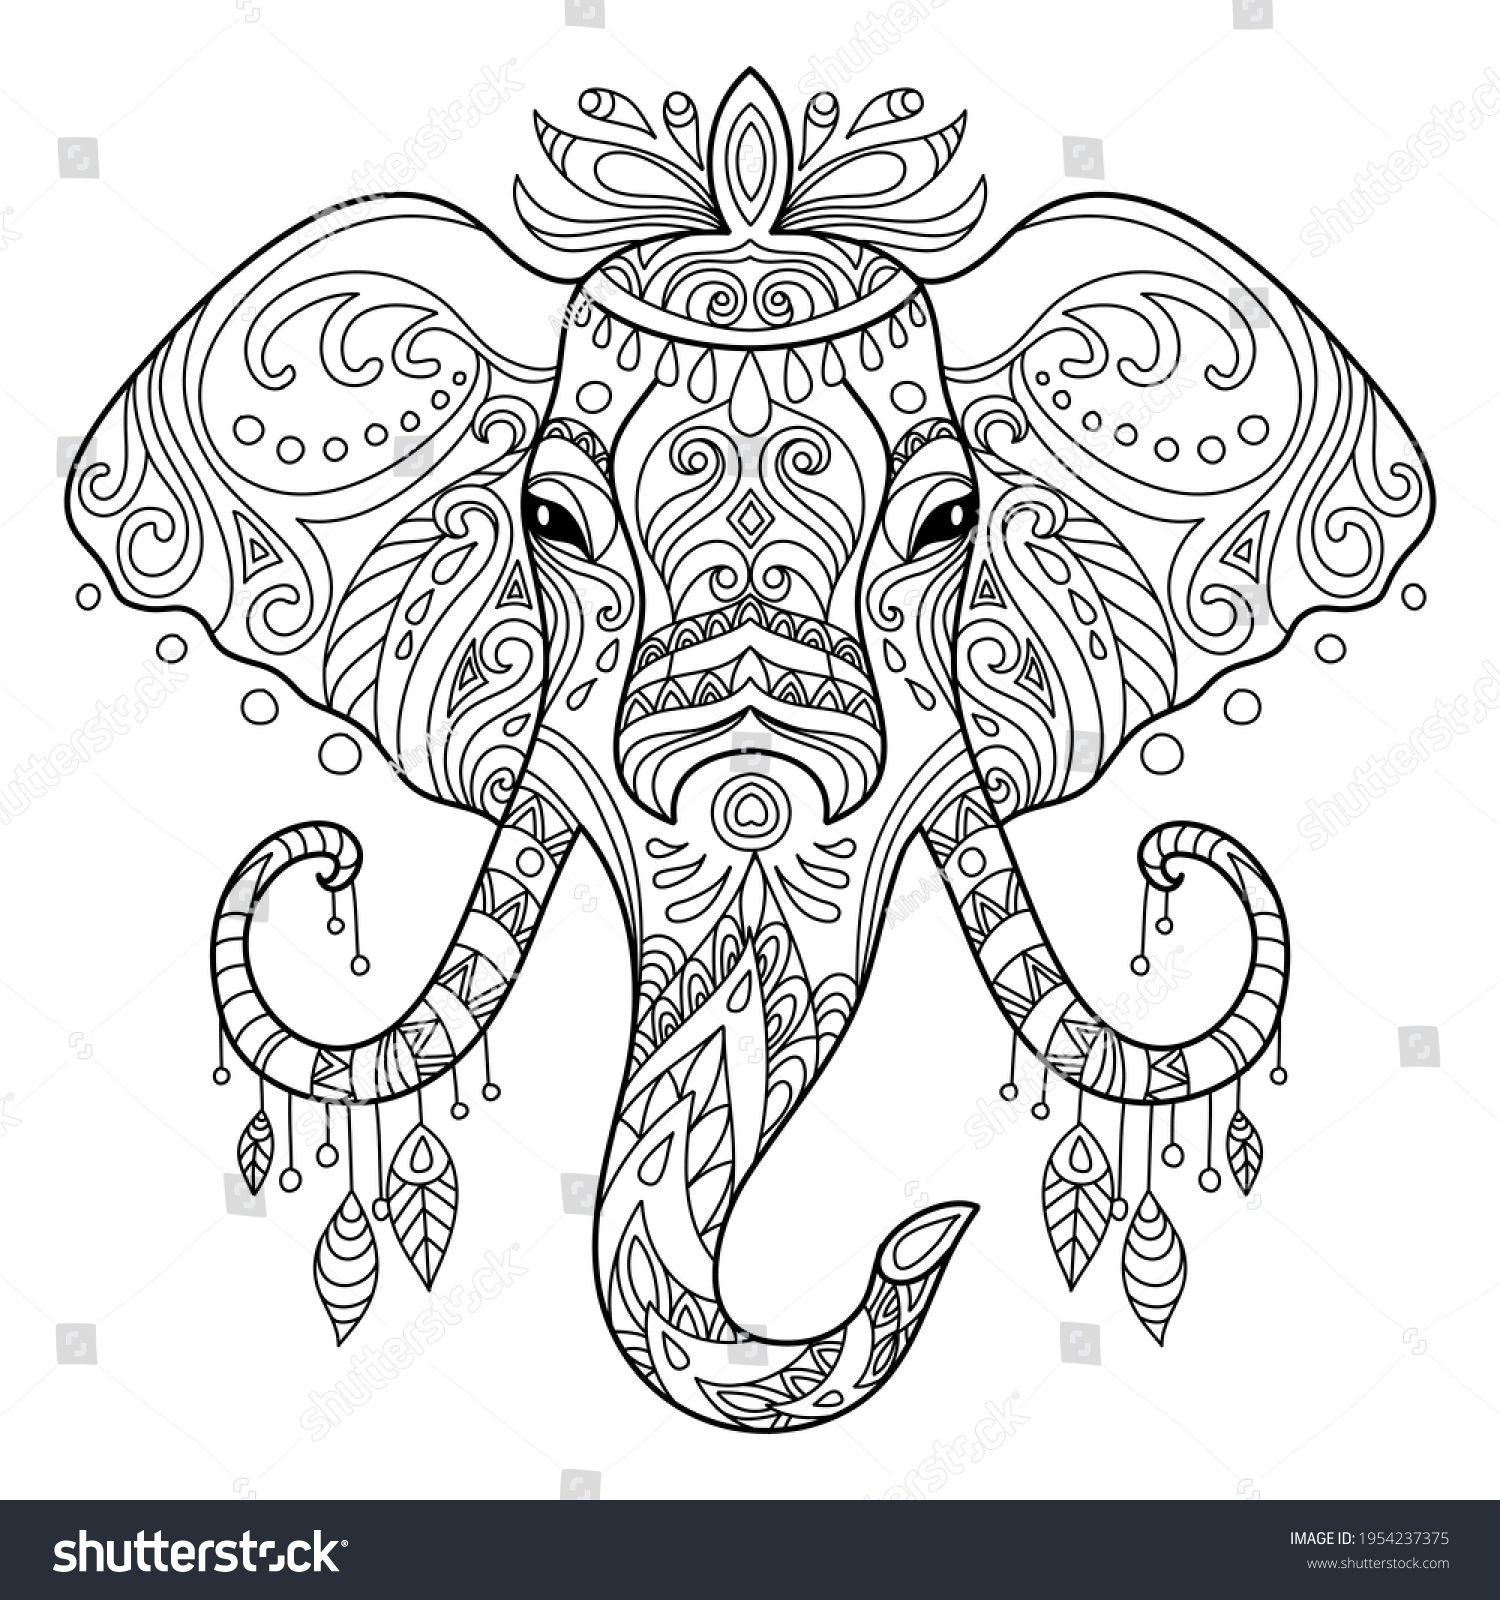 SVG of Head of elephant . Abstract vector contour illustration isolated on white background. For adult anti stress coloring book page with doodle and zentangle elements, design, print, decor, tattoo, t-shirt svg